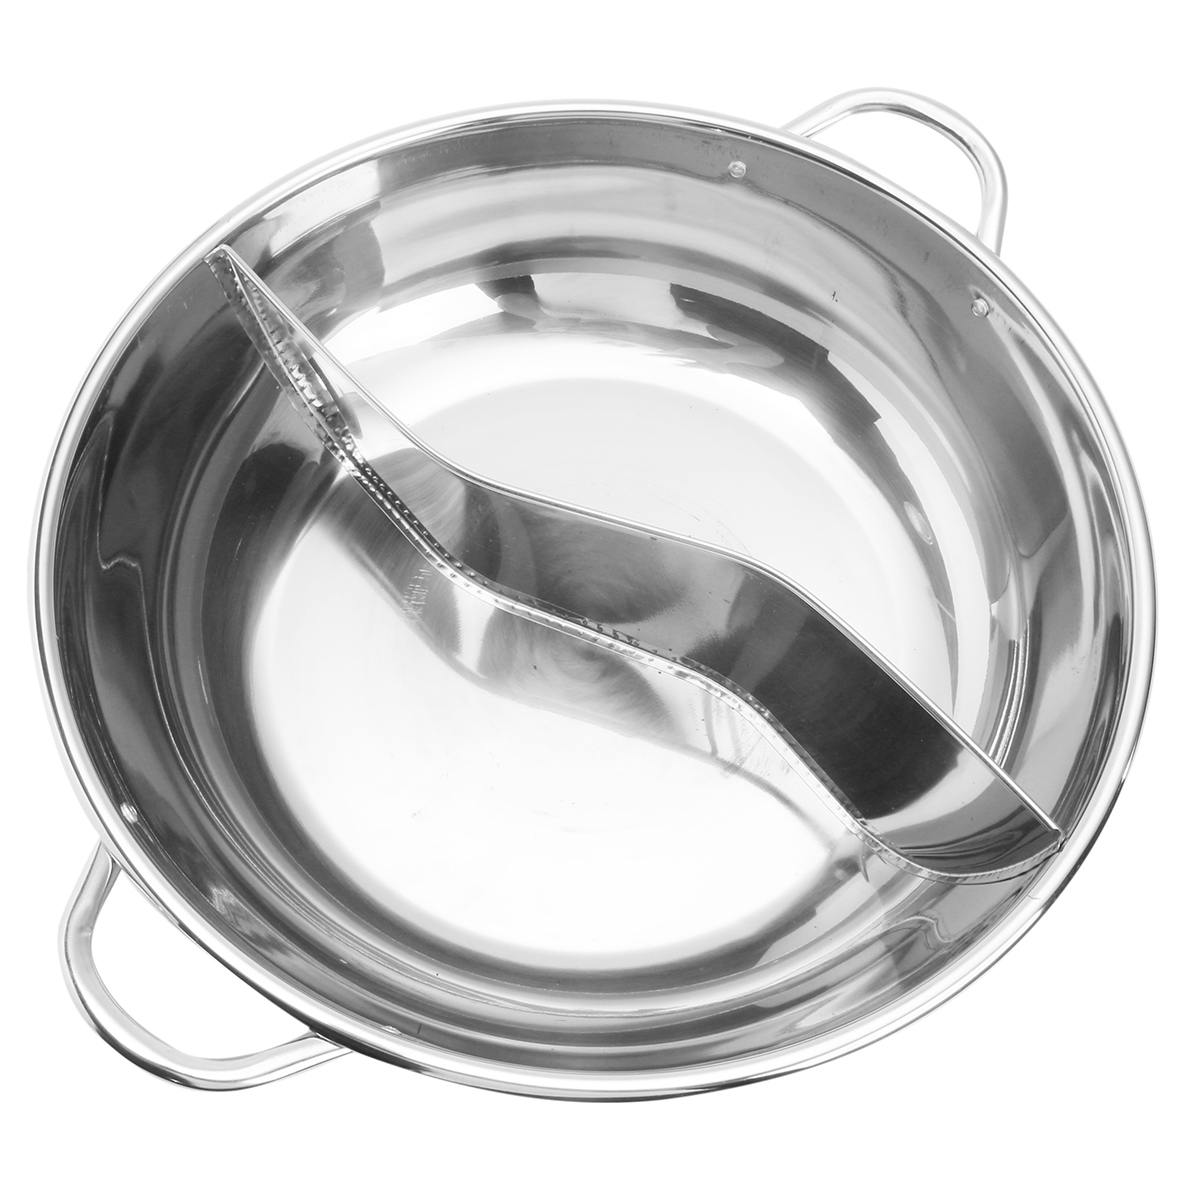 28cm Hot Pot Twin Divided Stainless Steel 